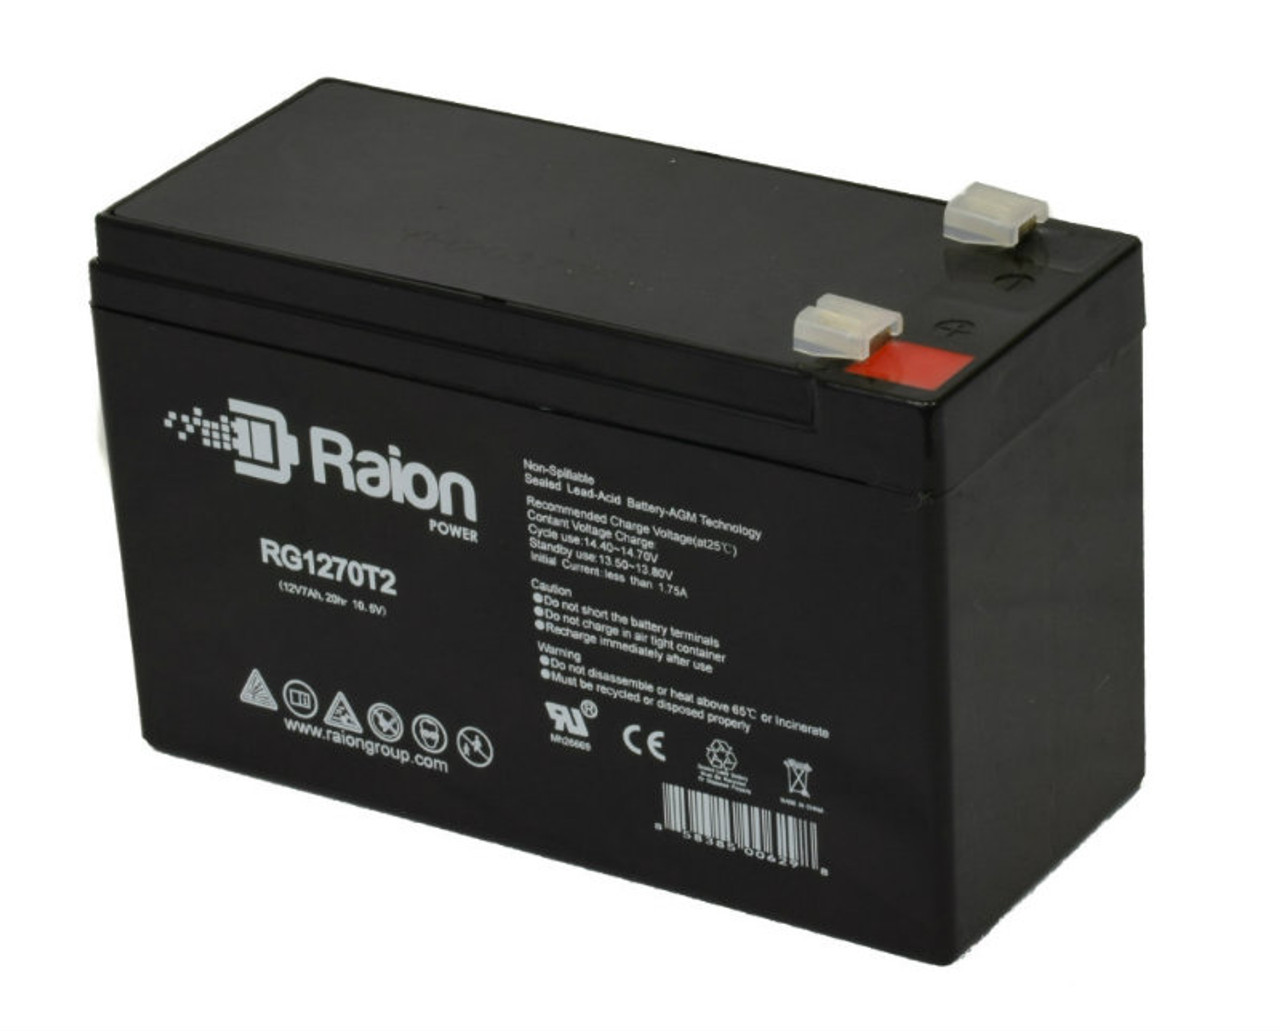 Raion Power Replacement 12V 7Ah RG1270T1 Fire Alarm Battery for Altronix SMP5PMCTXPD8CB